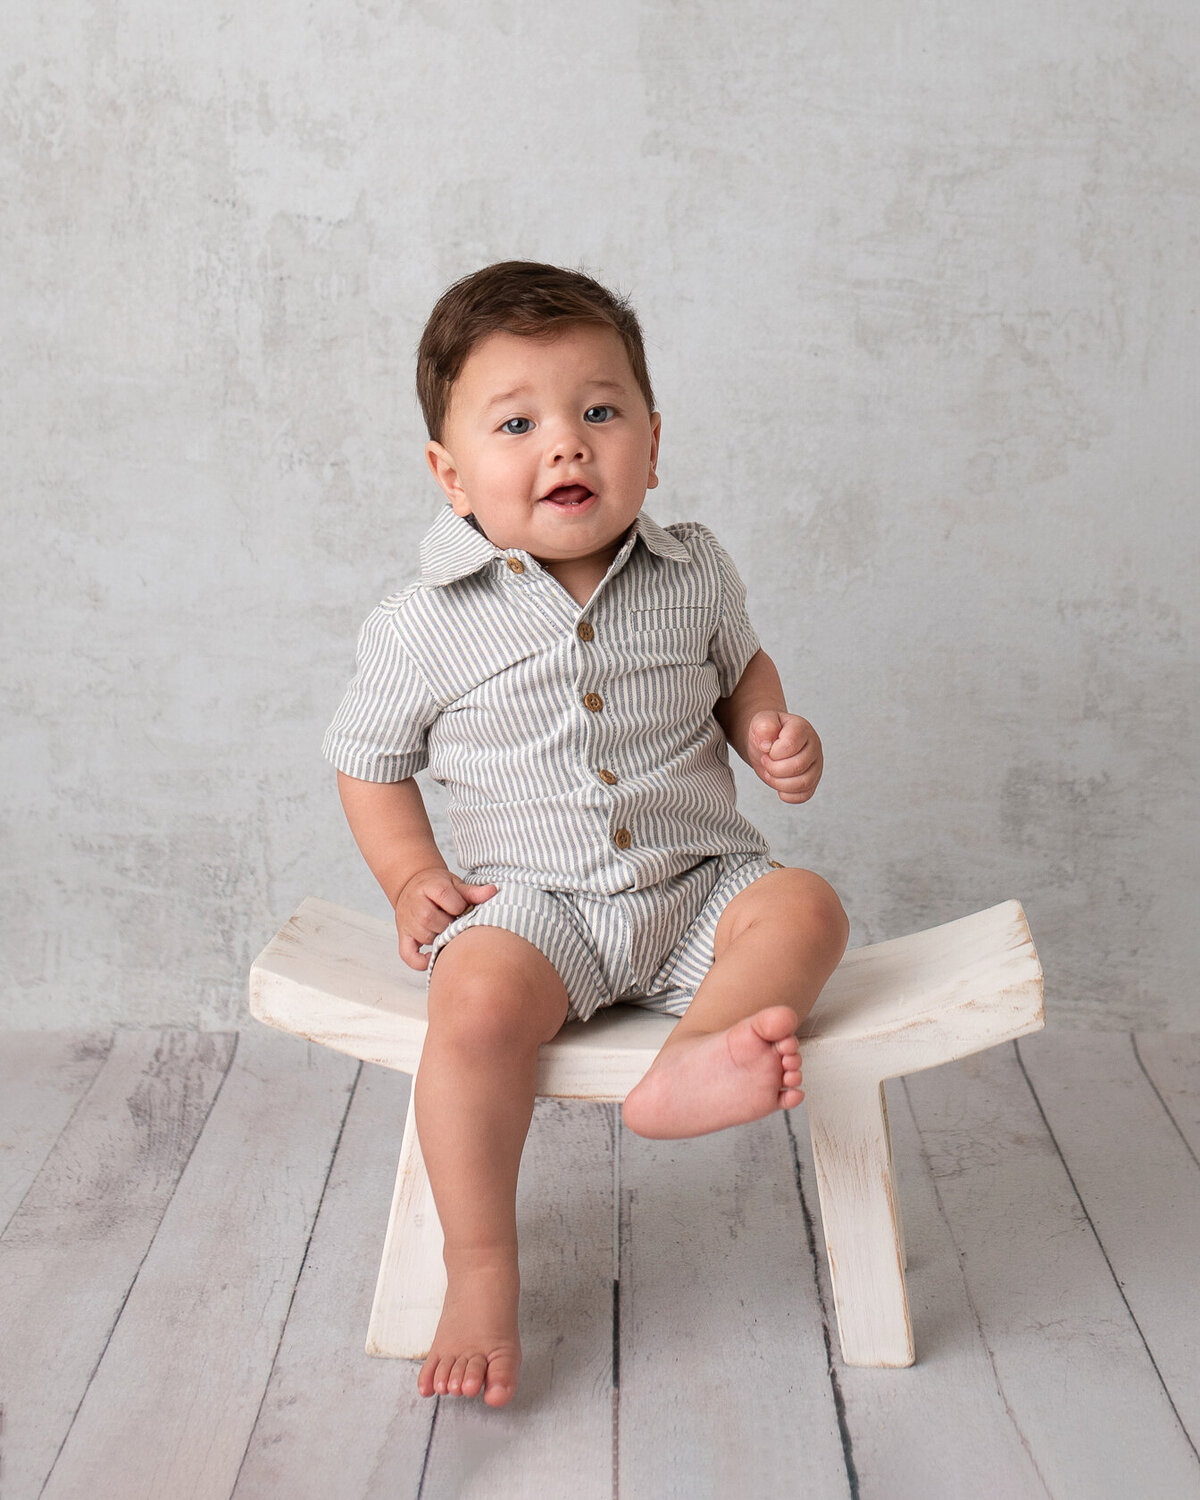 Sitting baby portrait in grey background by Laura King photography